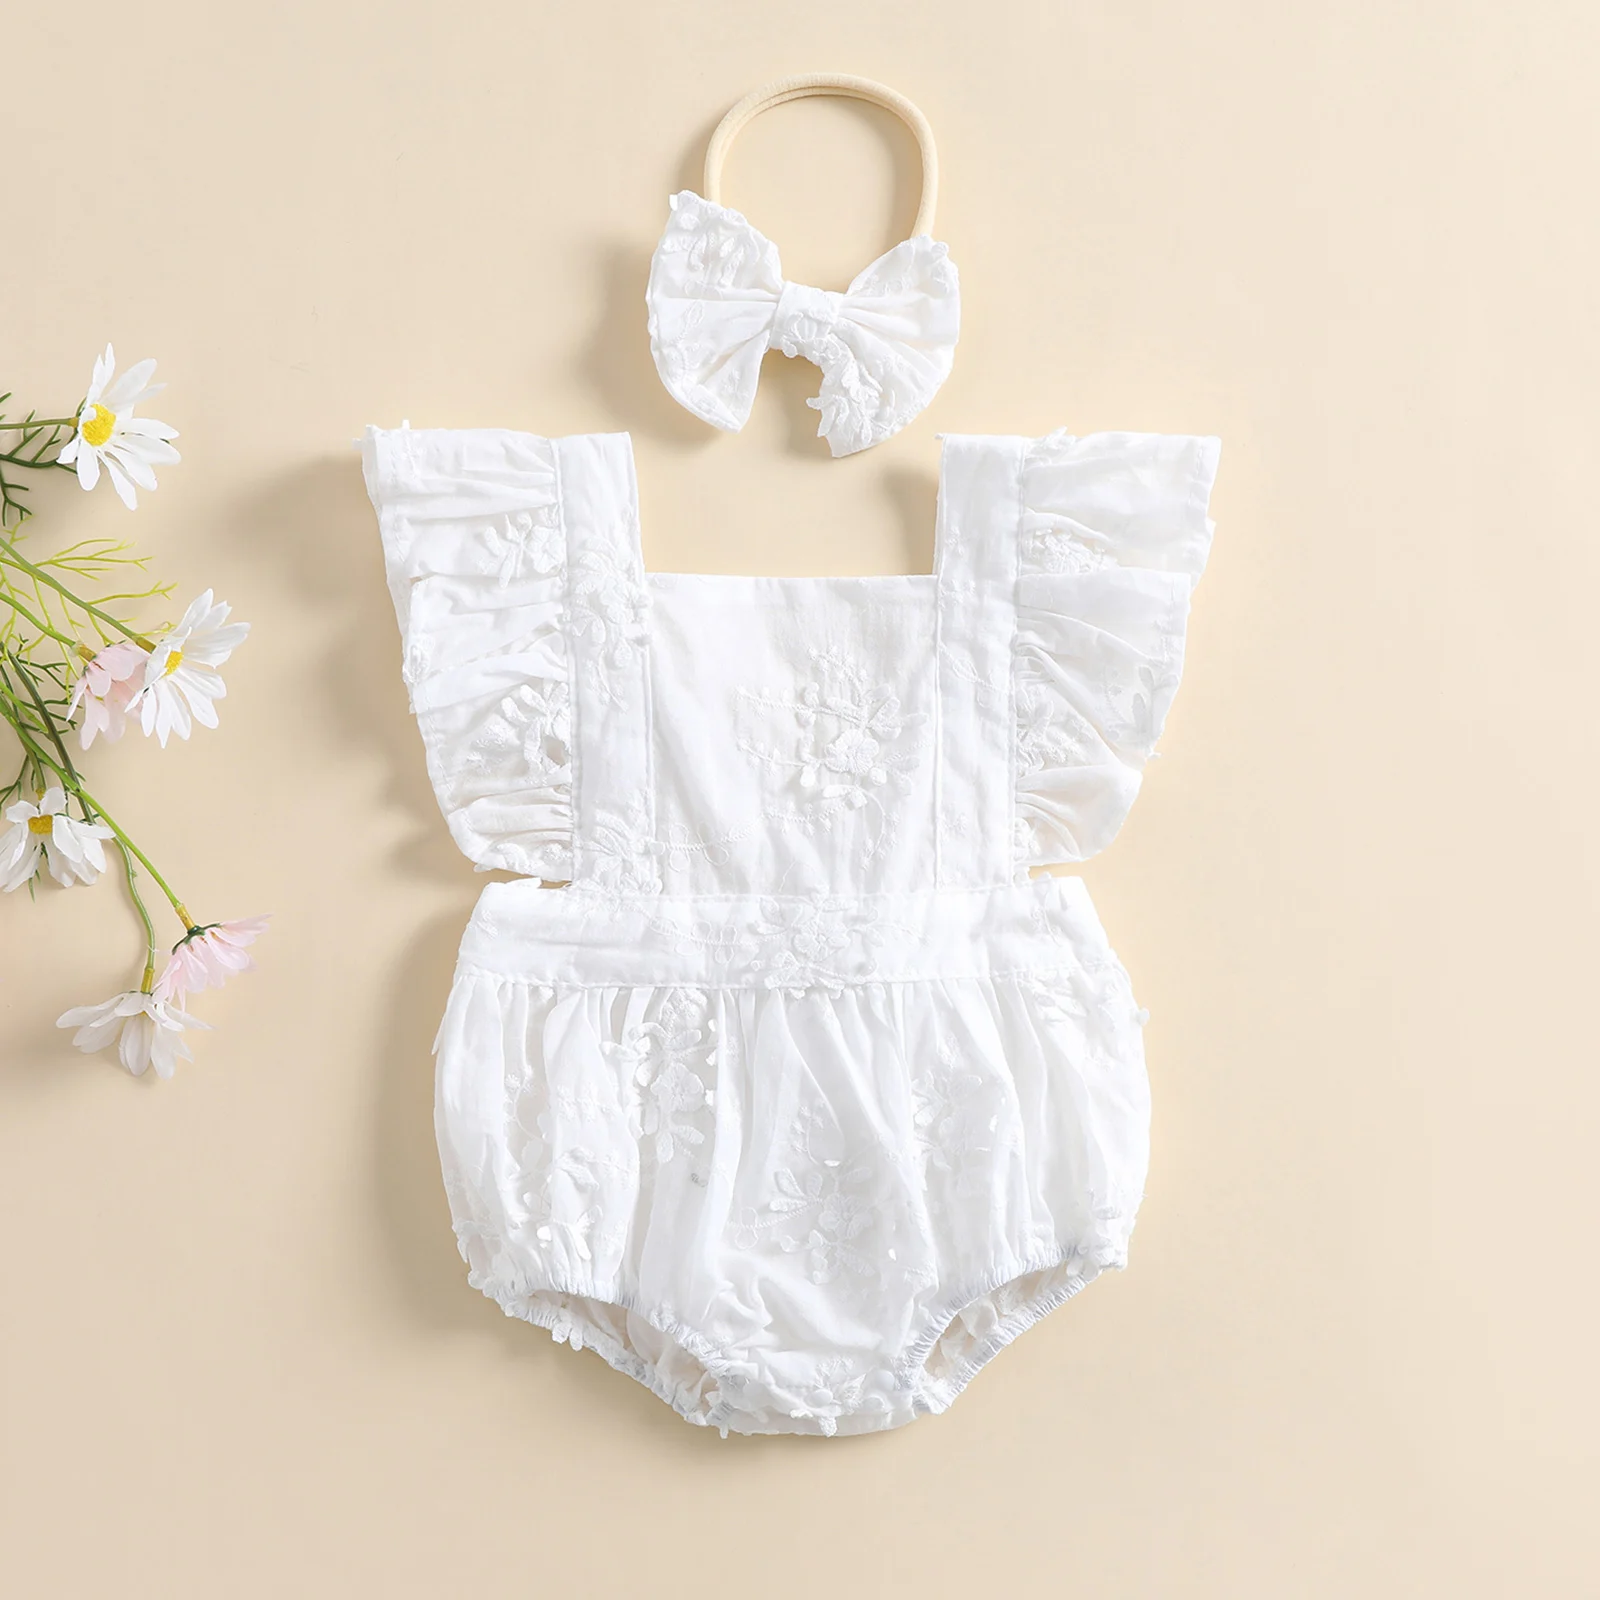 Baby Bodysuits expensive Newborn Baby Girls Summer Romper with Headband Toddler Lovely 2pcs Clothes Suit Fly Sleeves Lace Tie-Up Backless Jumpsuit Baby Bodysuits expensive